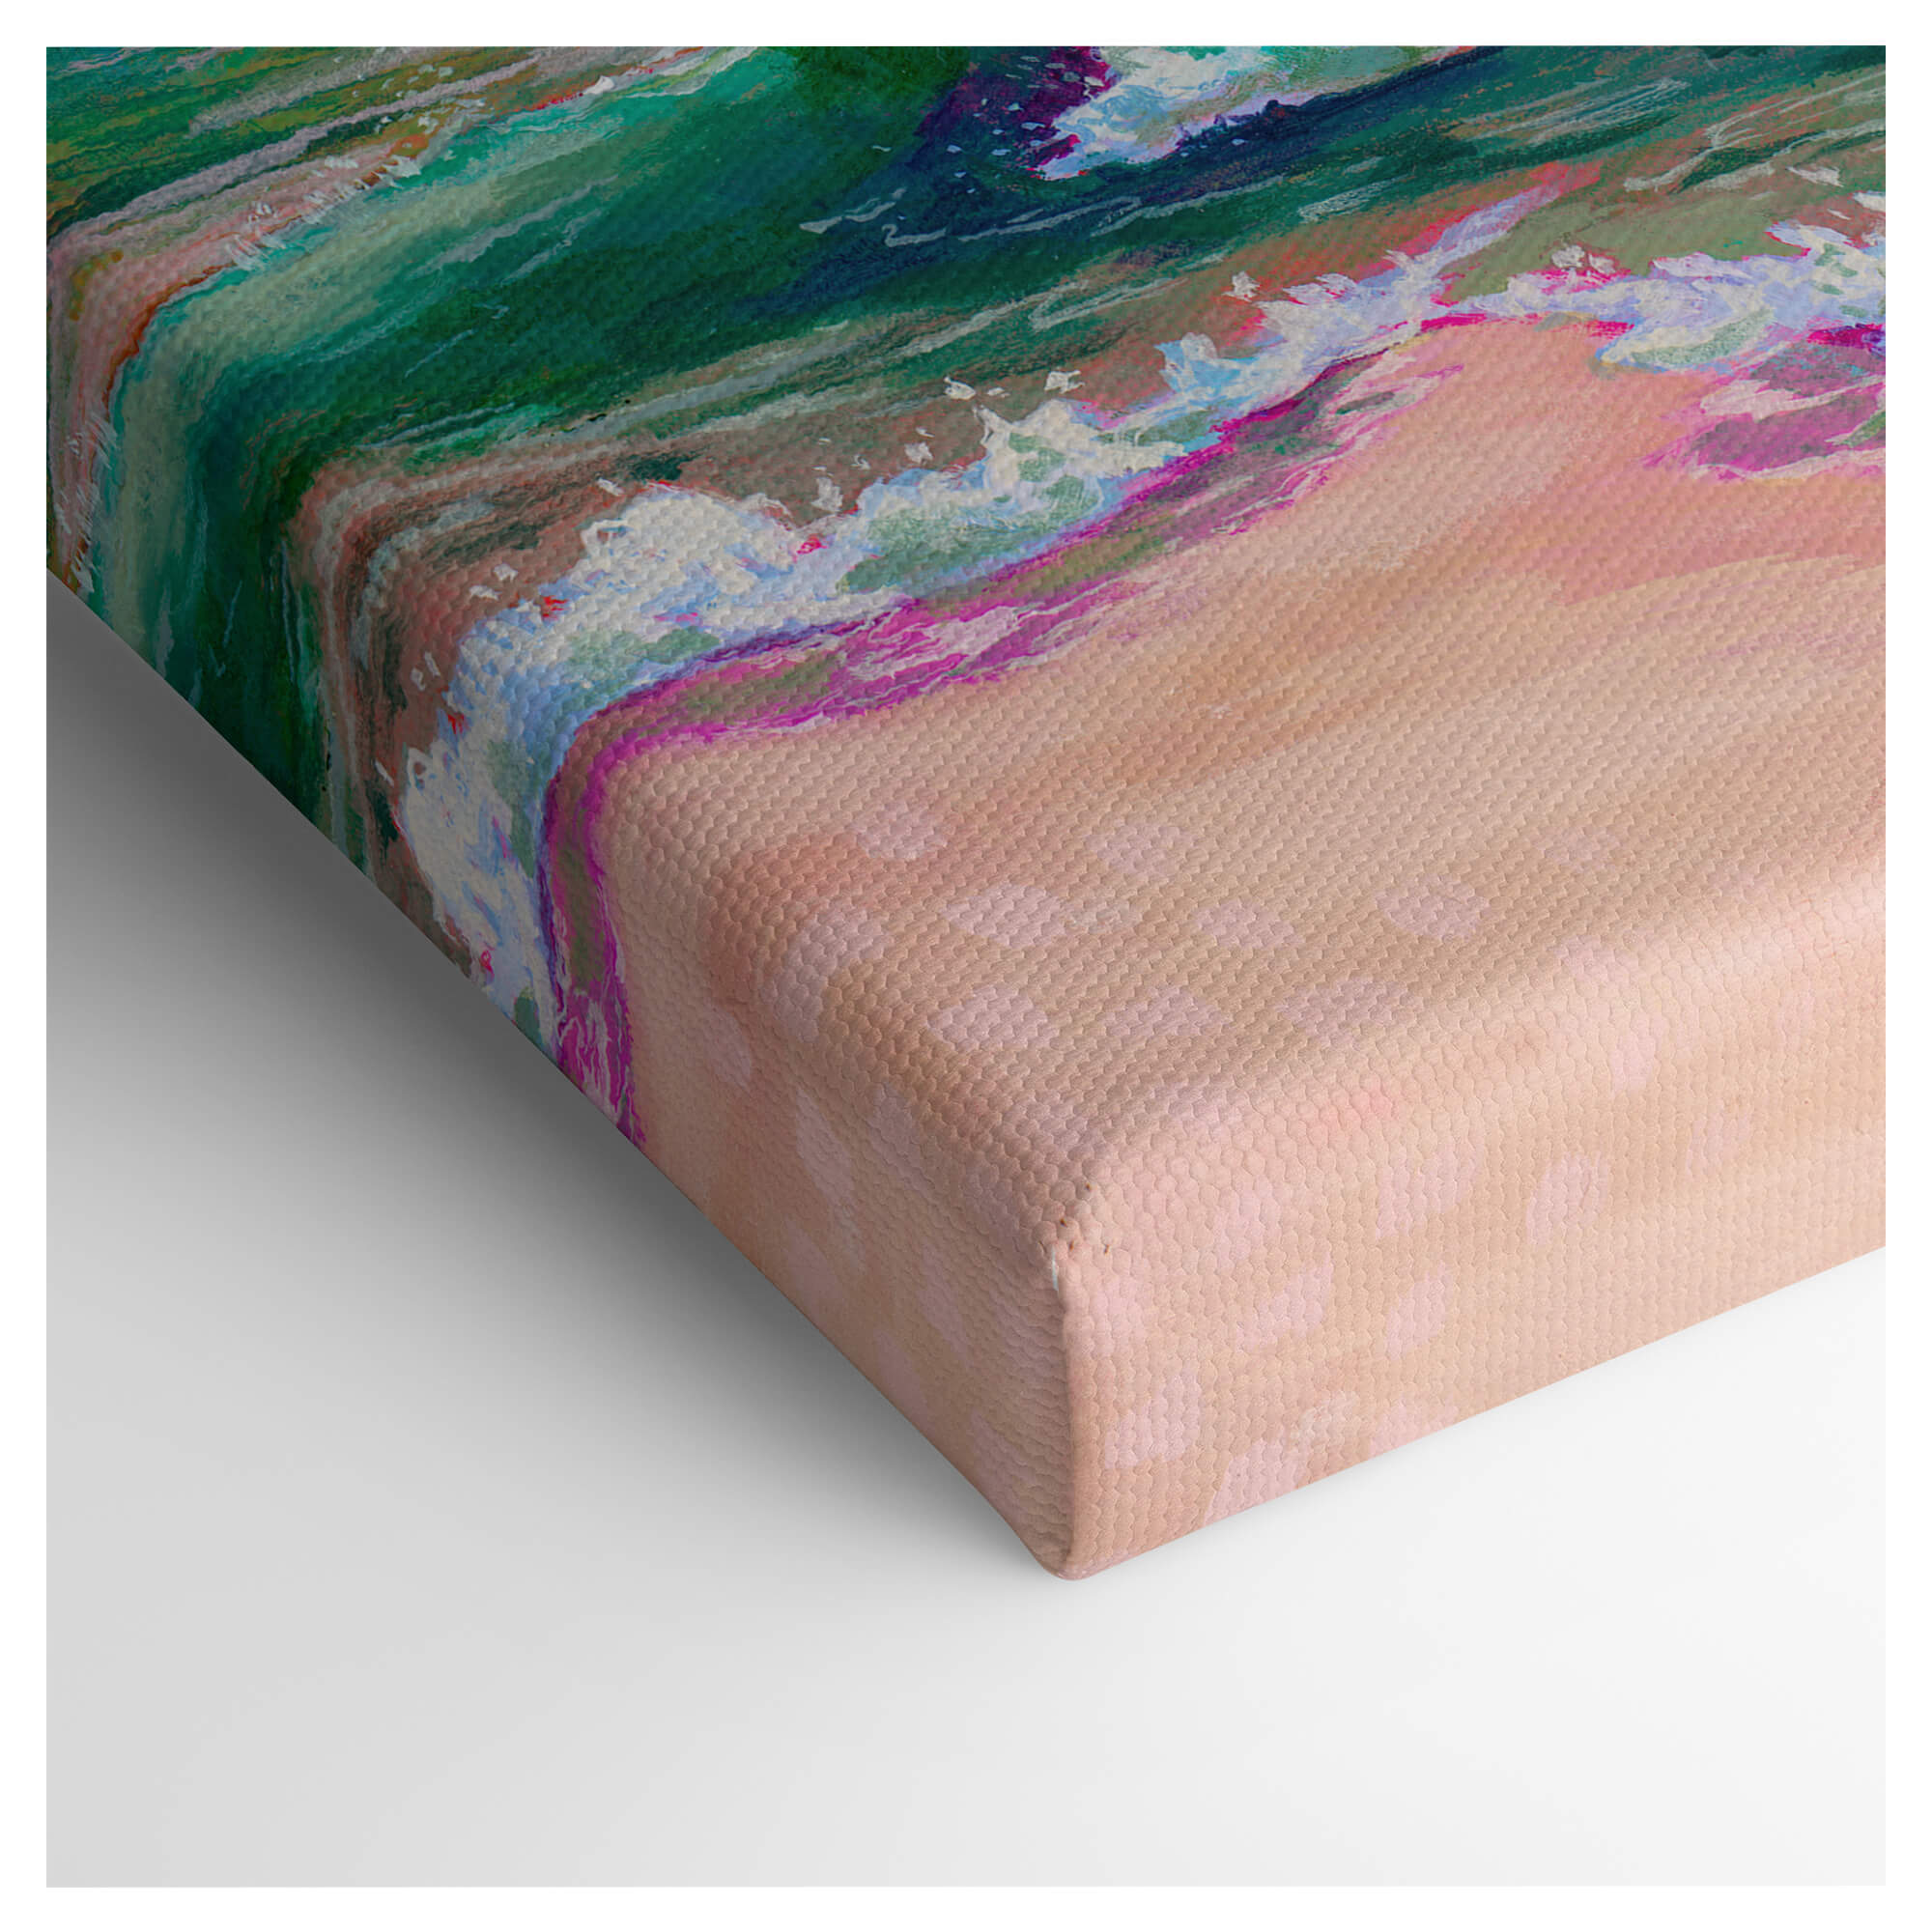 Gallery wrap details showing a pink-hued sand and green crashing waves by Hawaii artist Lindsay Wilkins